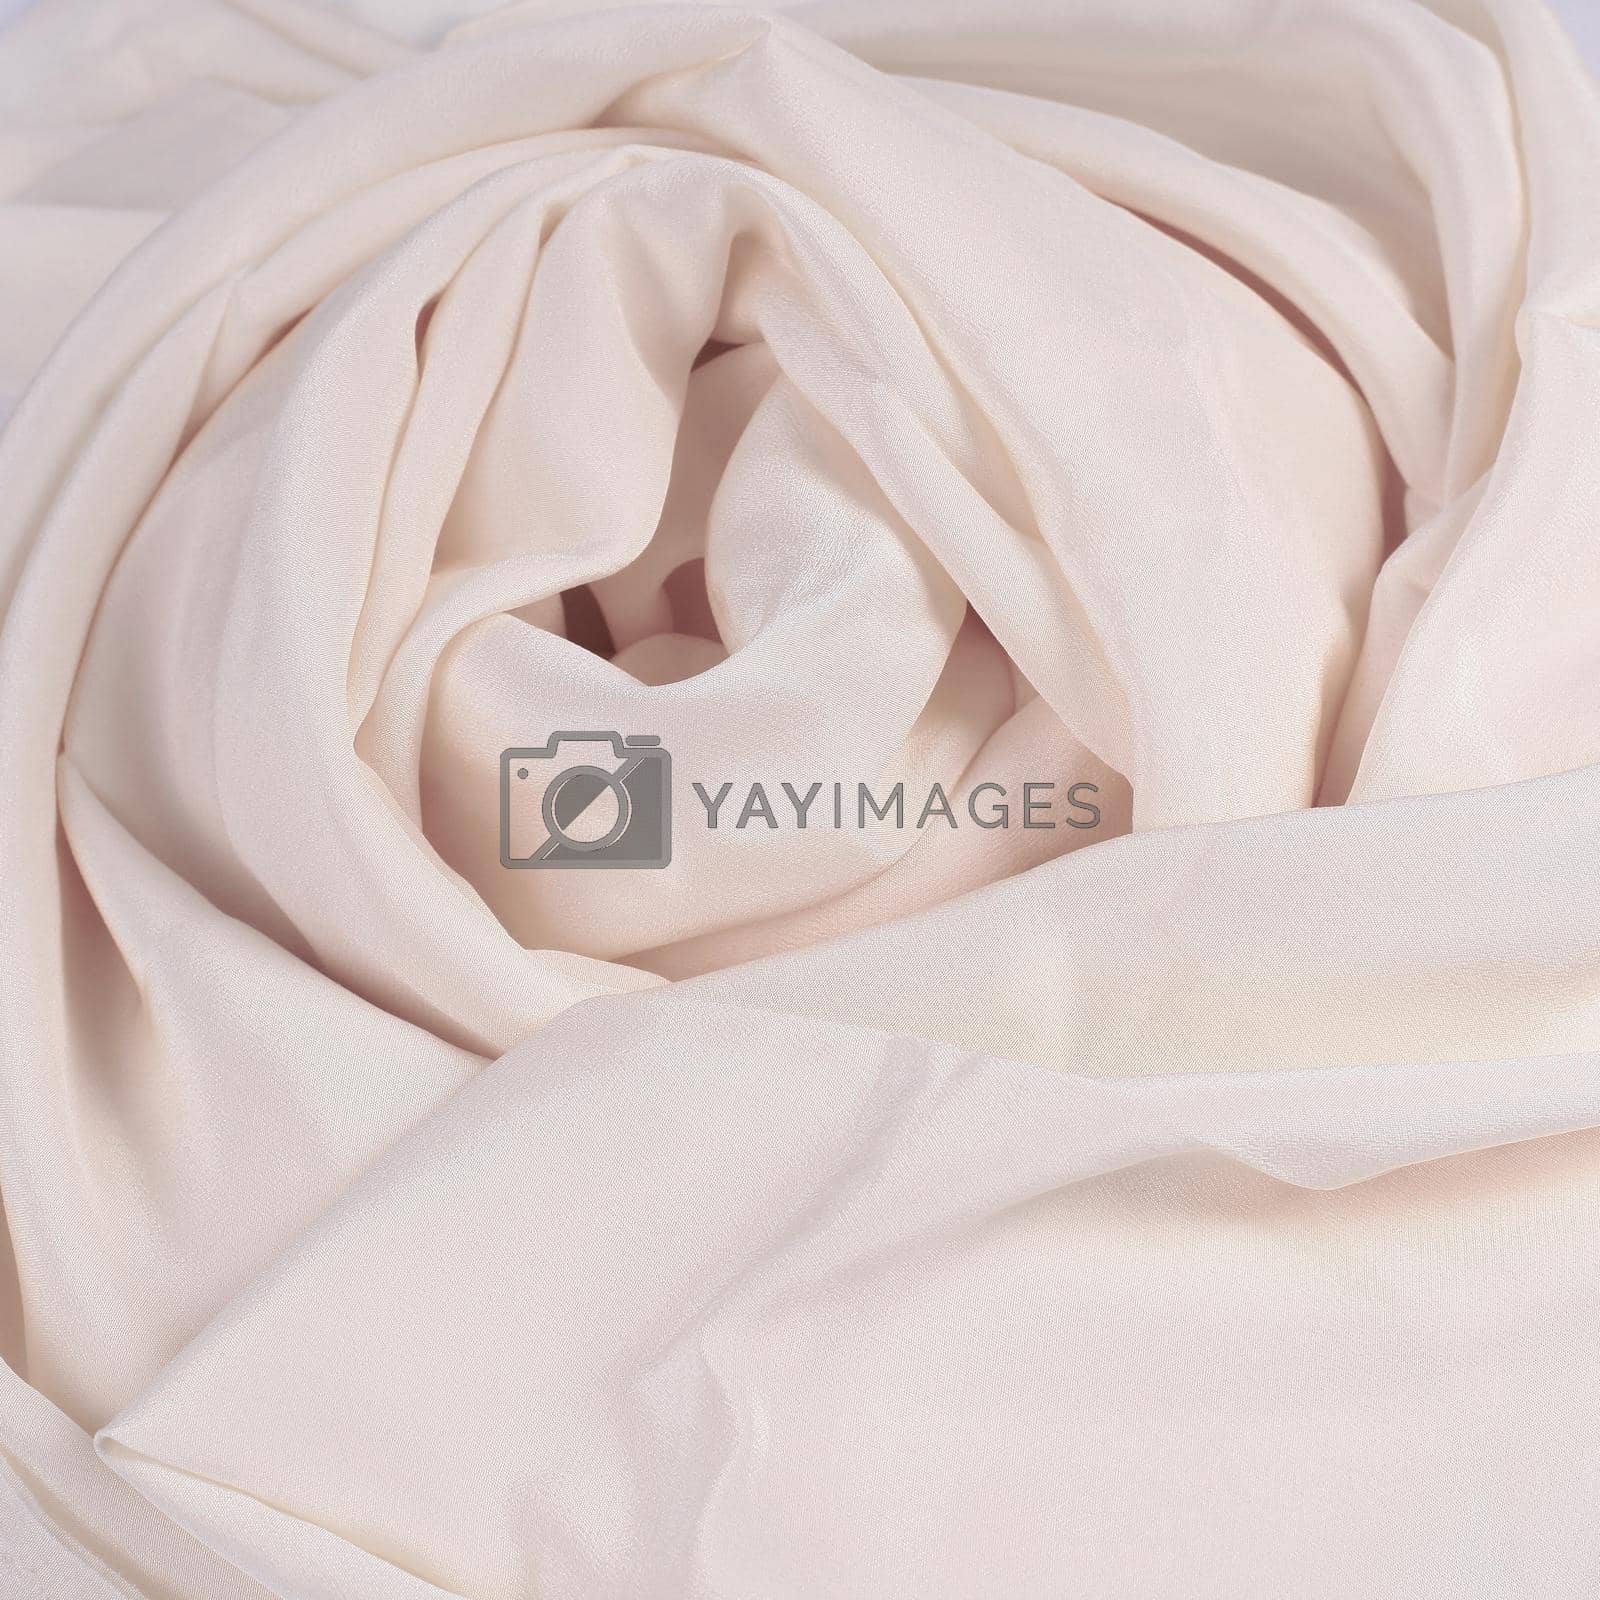 Royalty free image of closeup.transparent light scarf on a light background by SmartPhotoLab